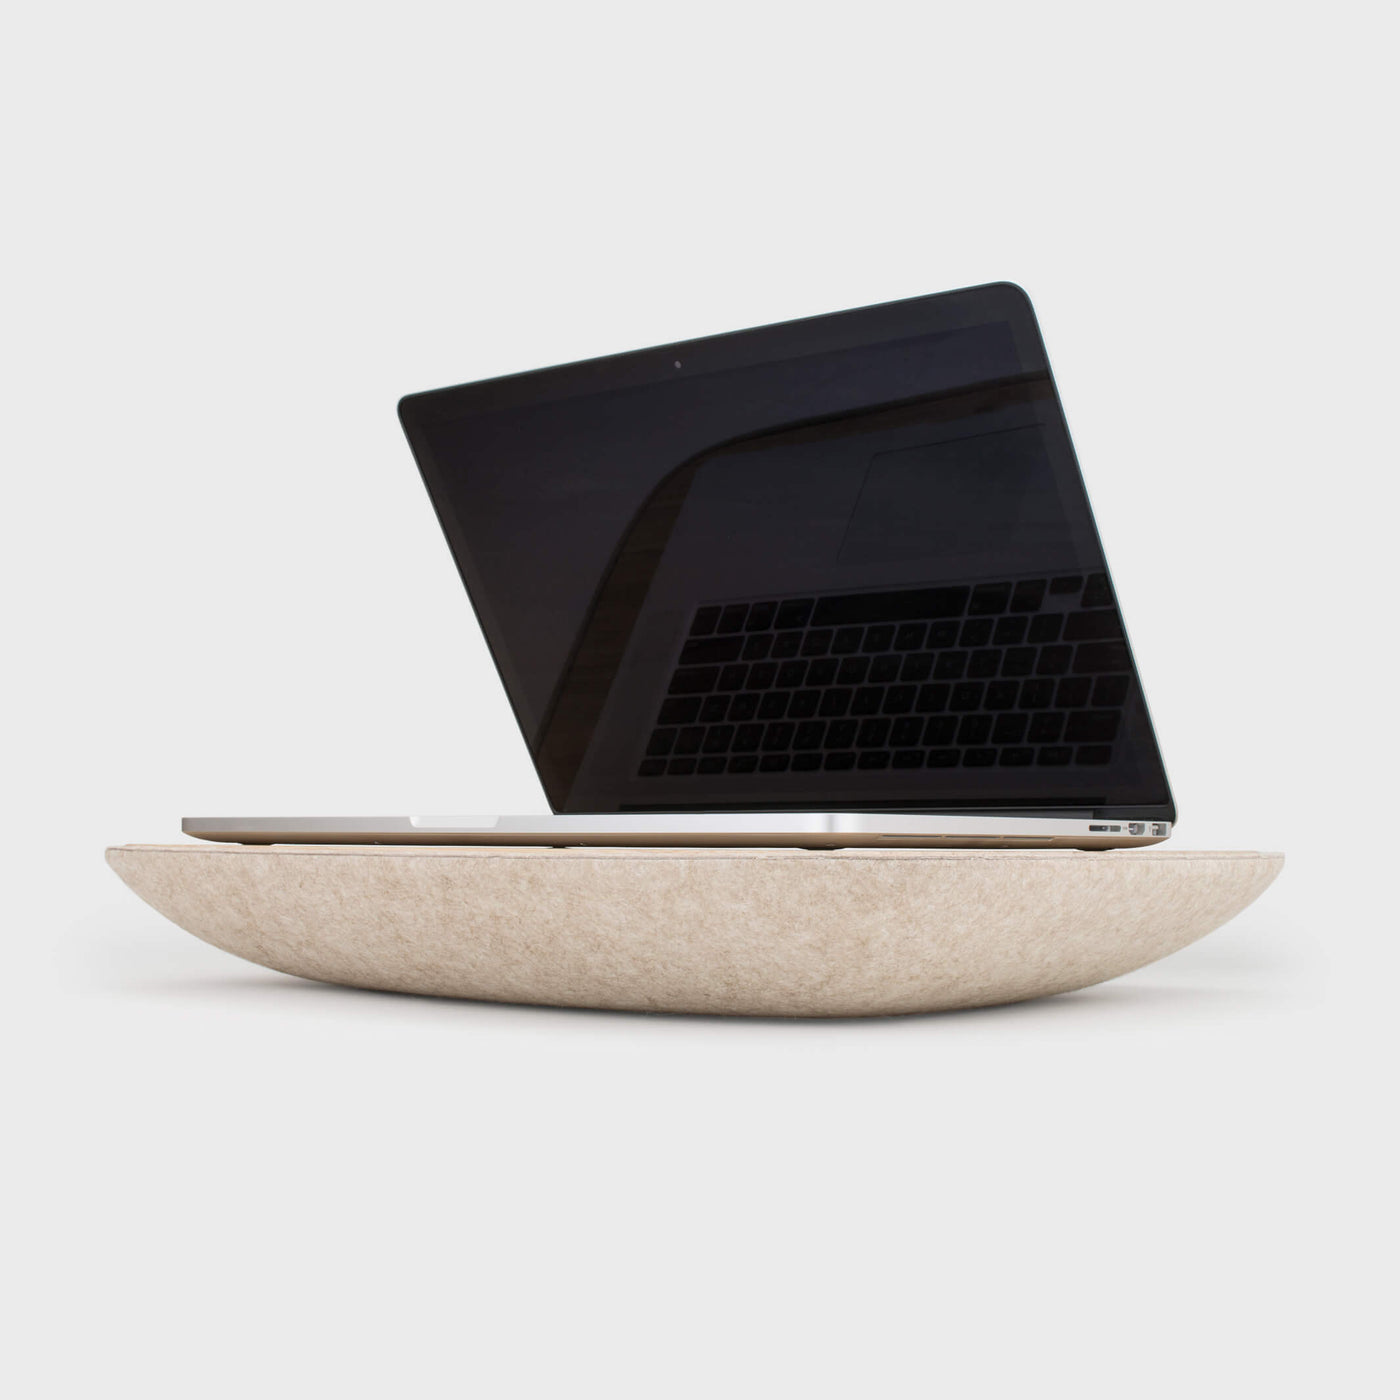 Macbook on oatmeal or Ash Grey cushion of Australian design Objct Lapod LapDesk storage organiser, or lap table & compartment